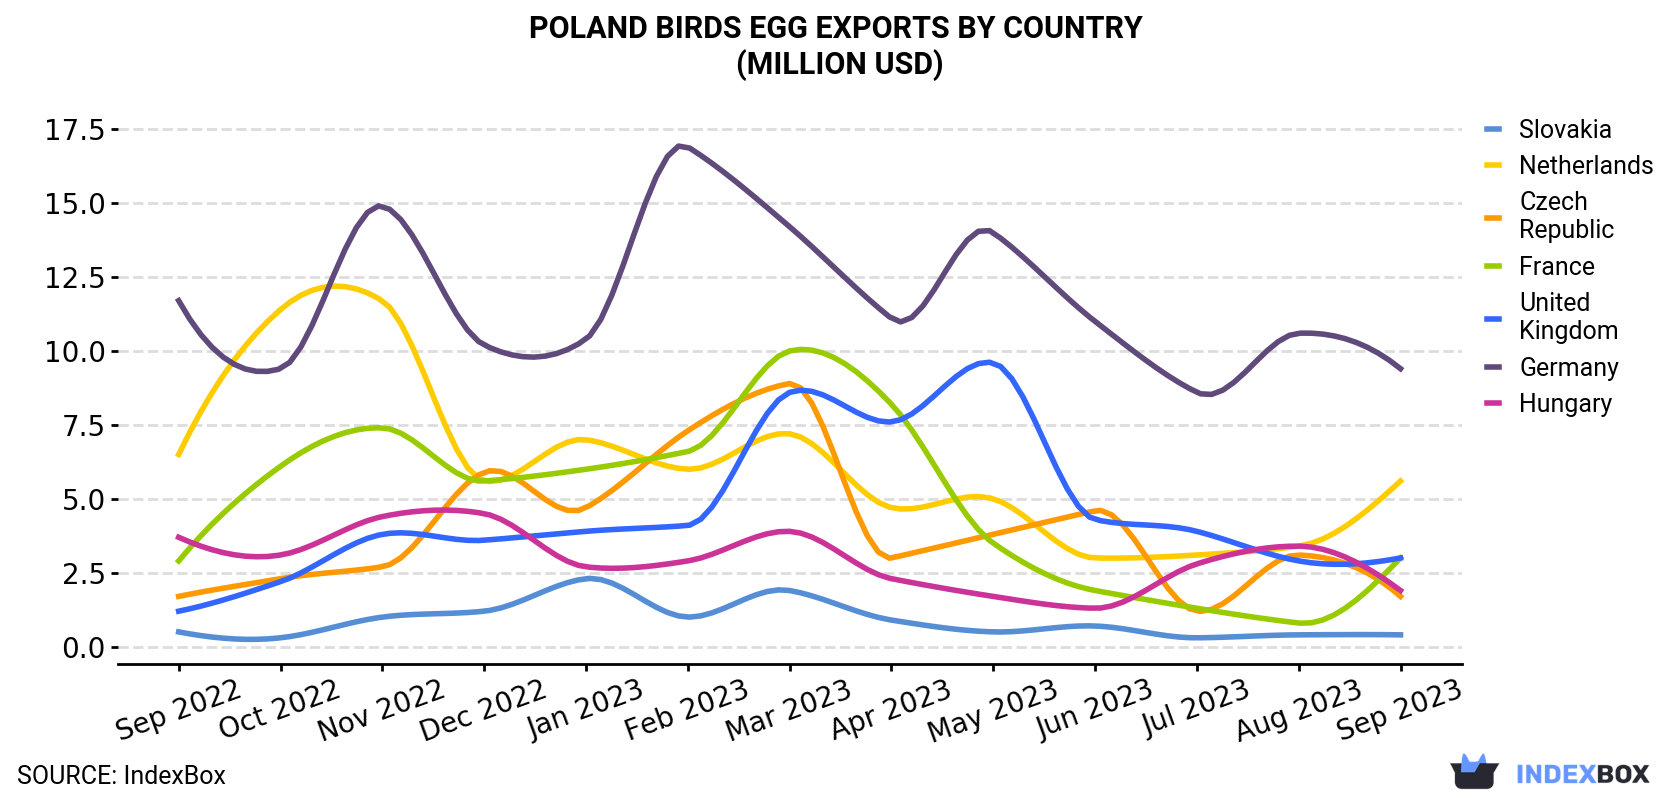 Poland Birds Egg Exports By Country (Million USD)